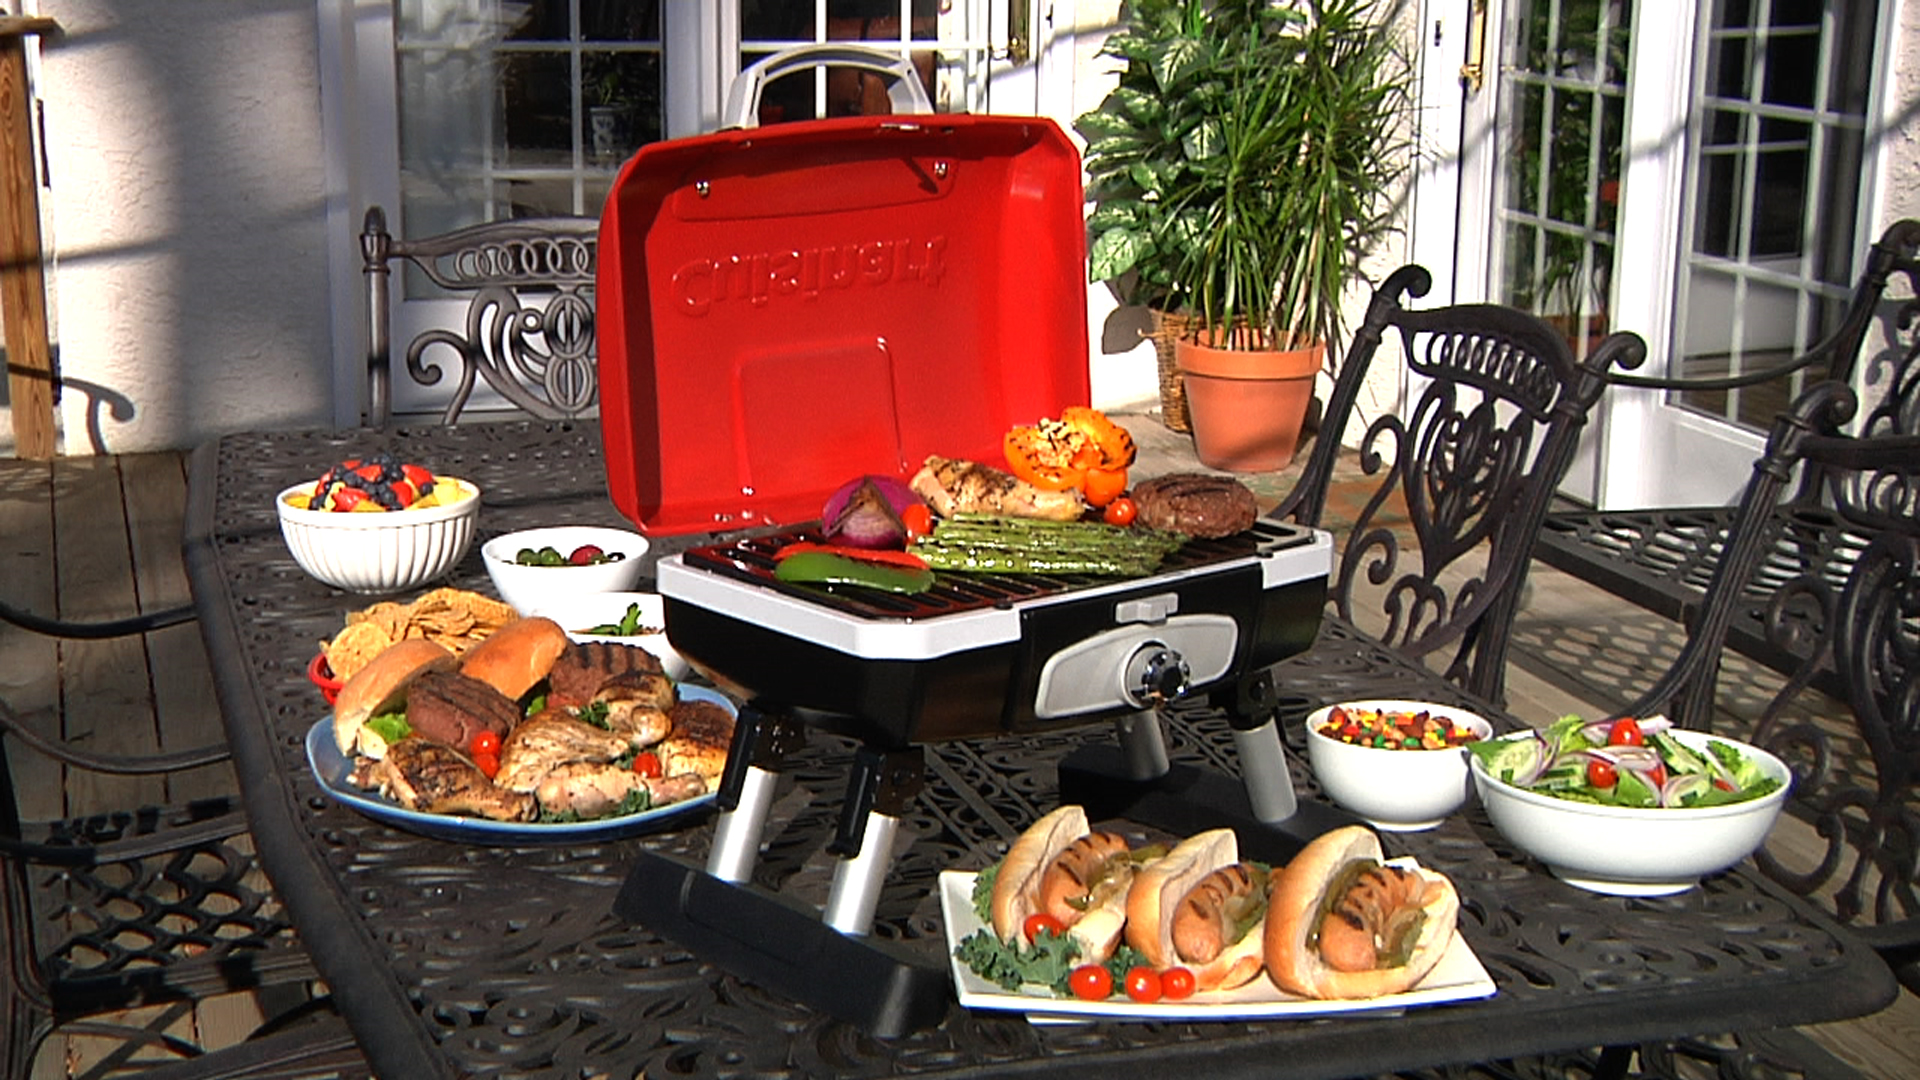 Cuisinart CGG-180T Petite Gourmet Portable Tabletop Outdoor Gas Grill, Red - image 5 of 9